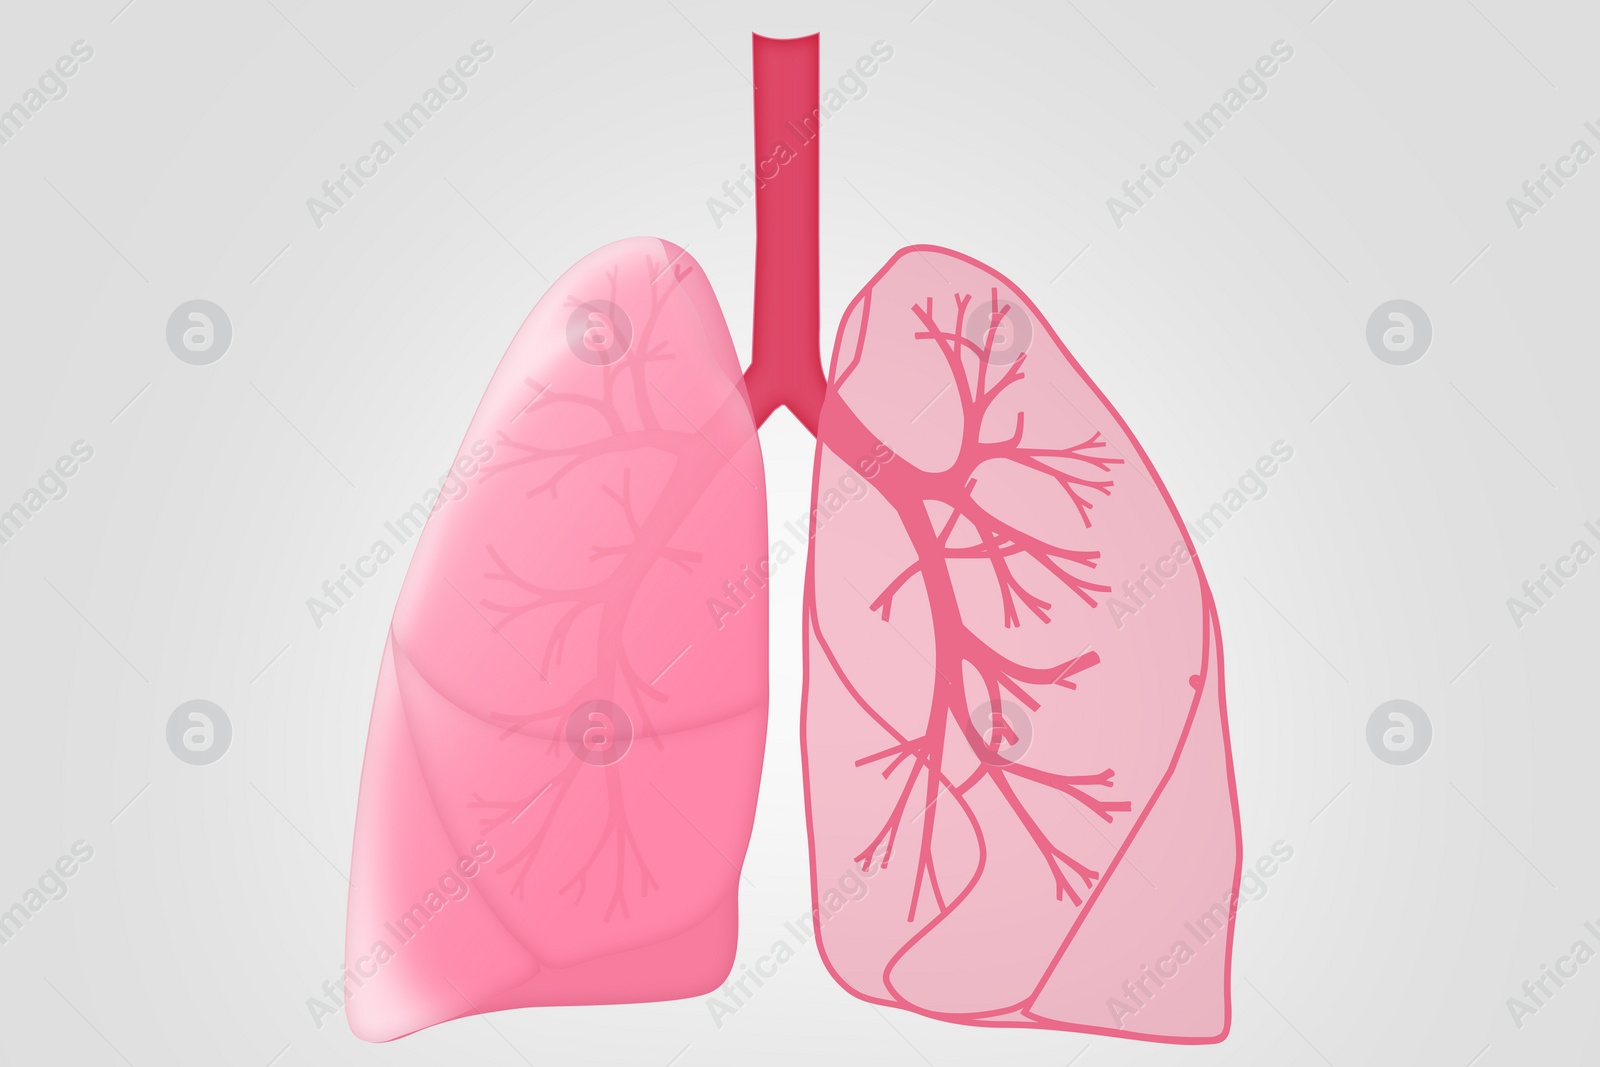 Illustration of  human lungs on white background